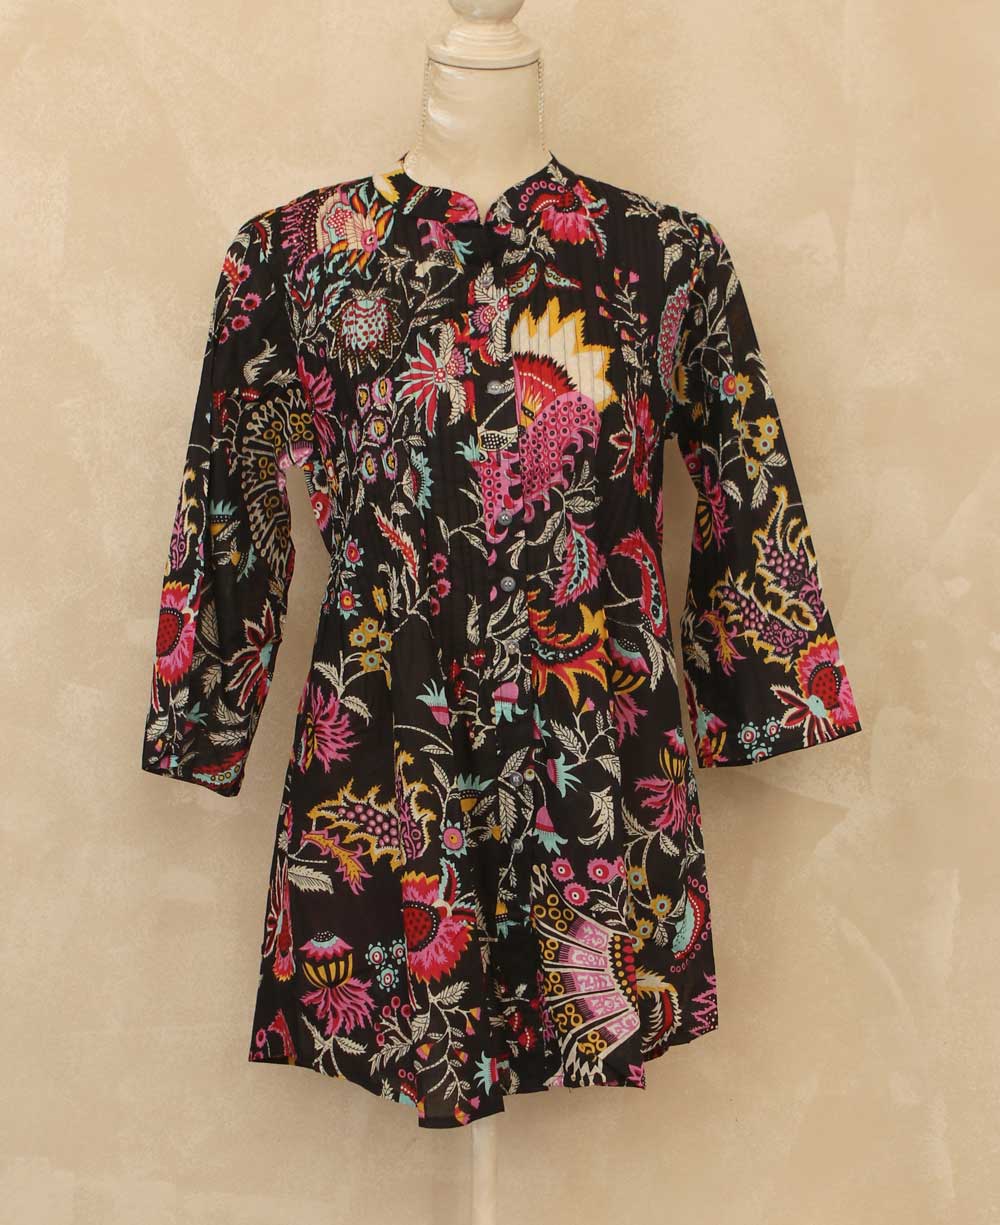 Floral print button-up tunic